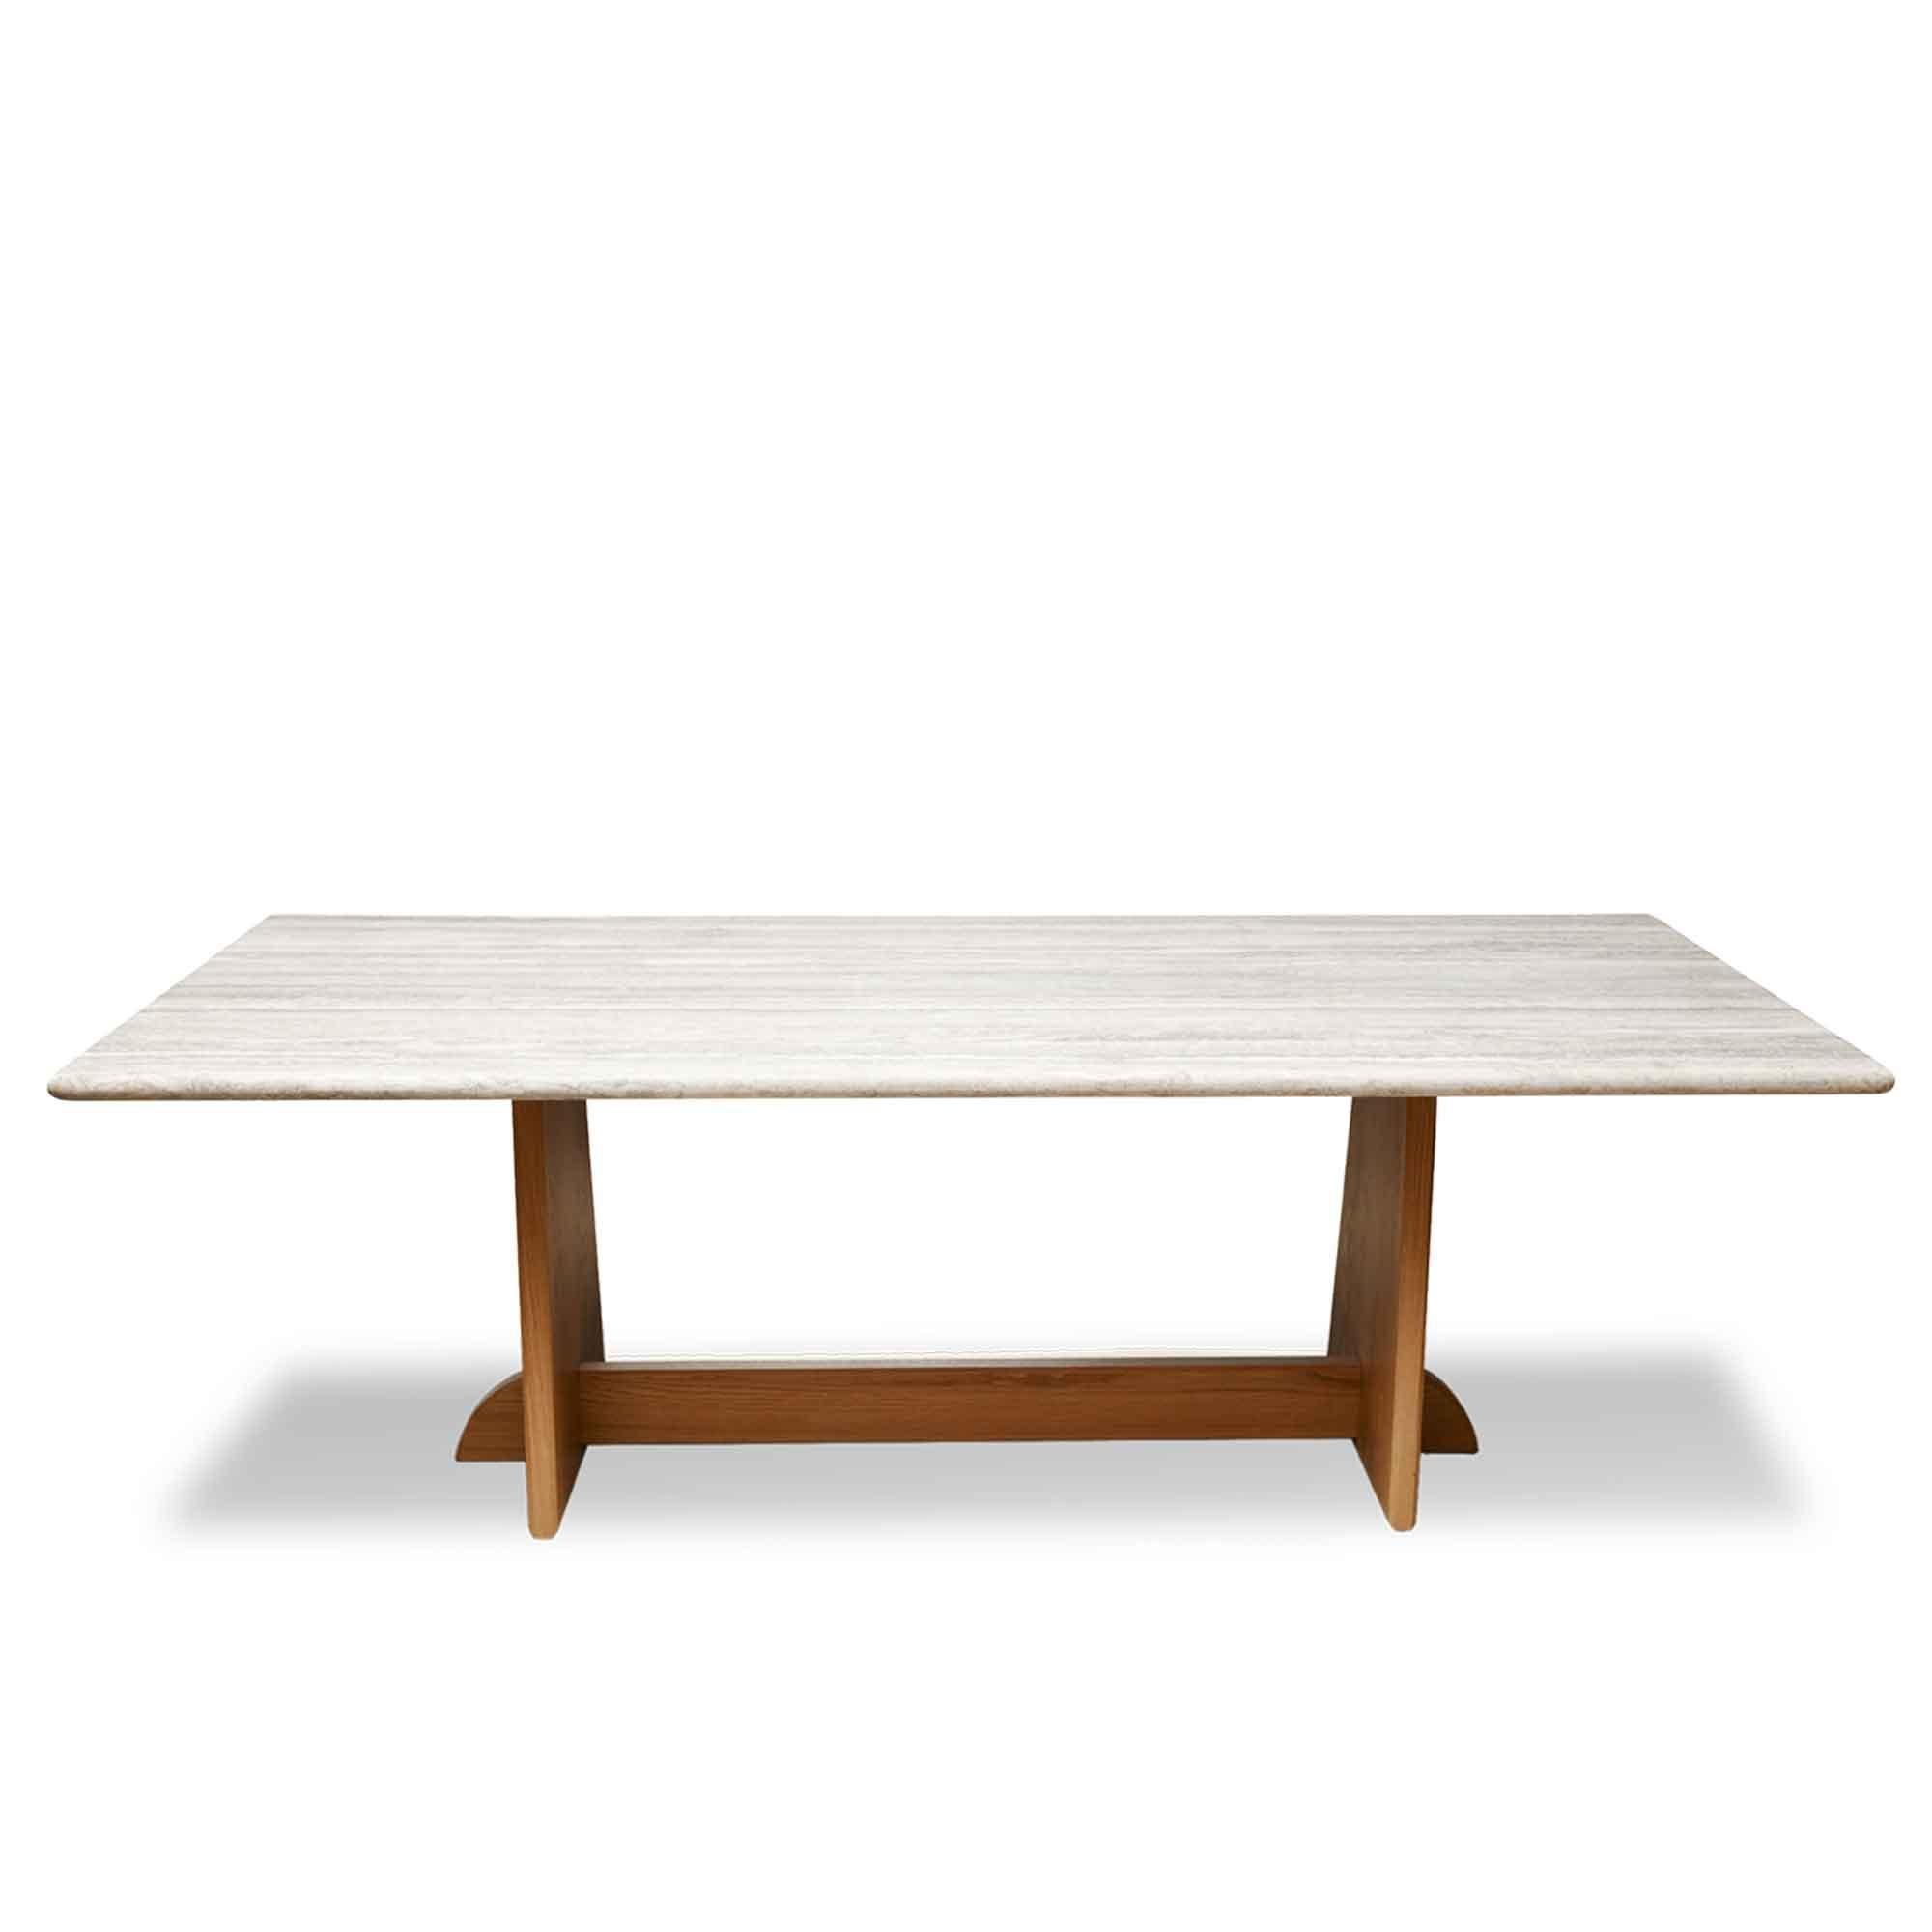 The Ojai dining table features a trestle base made of solid wood and the option of a stone or solid wood top. Available in three standard sizes. 

 The Lawson-Fenning collection is designed and handmade in Los Angeles, California. Reach out to